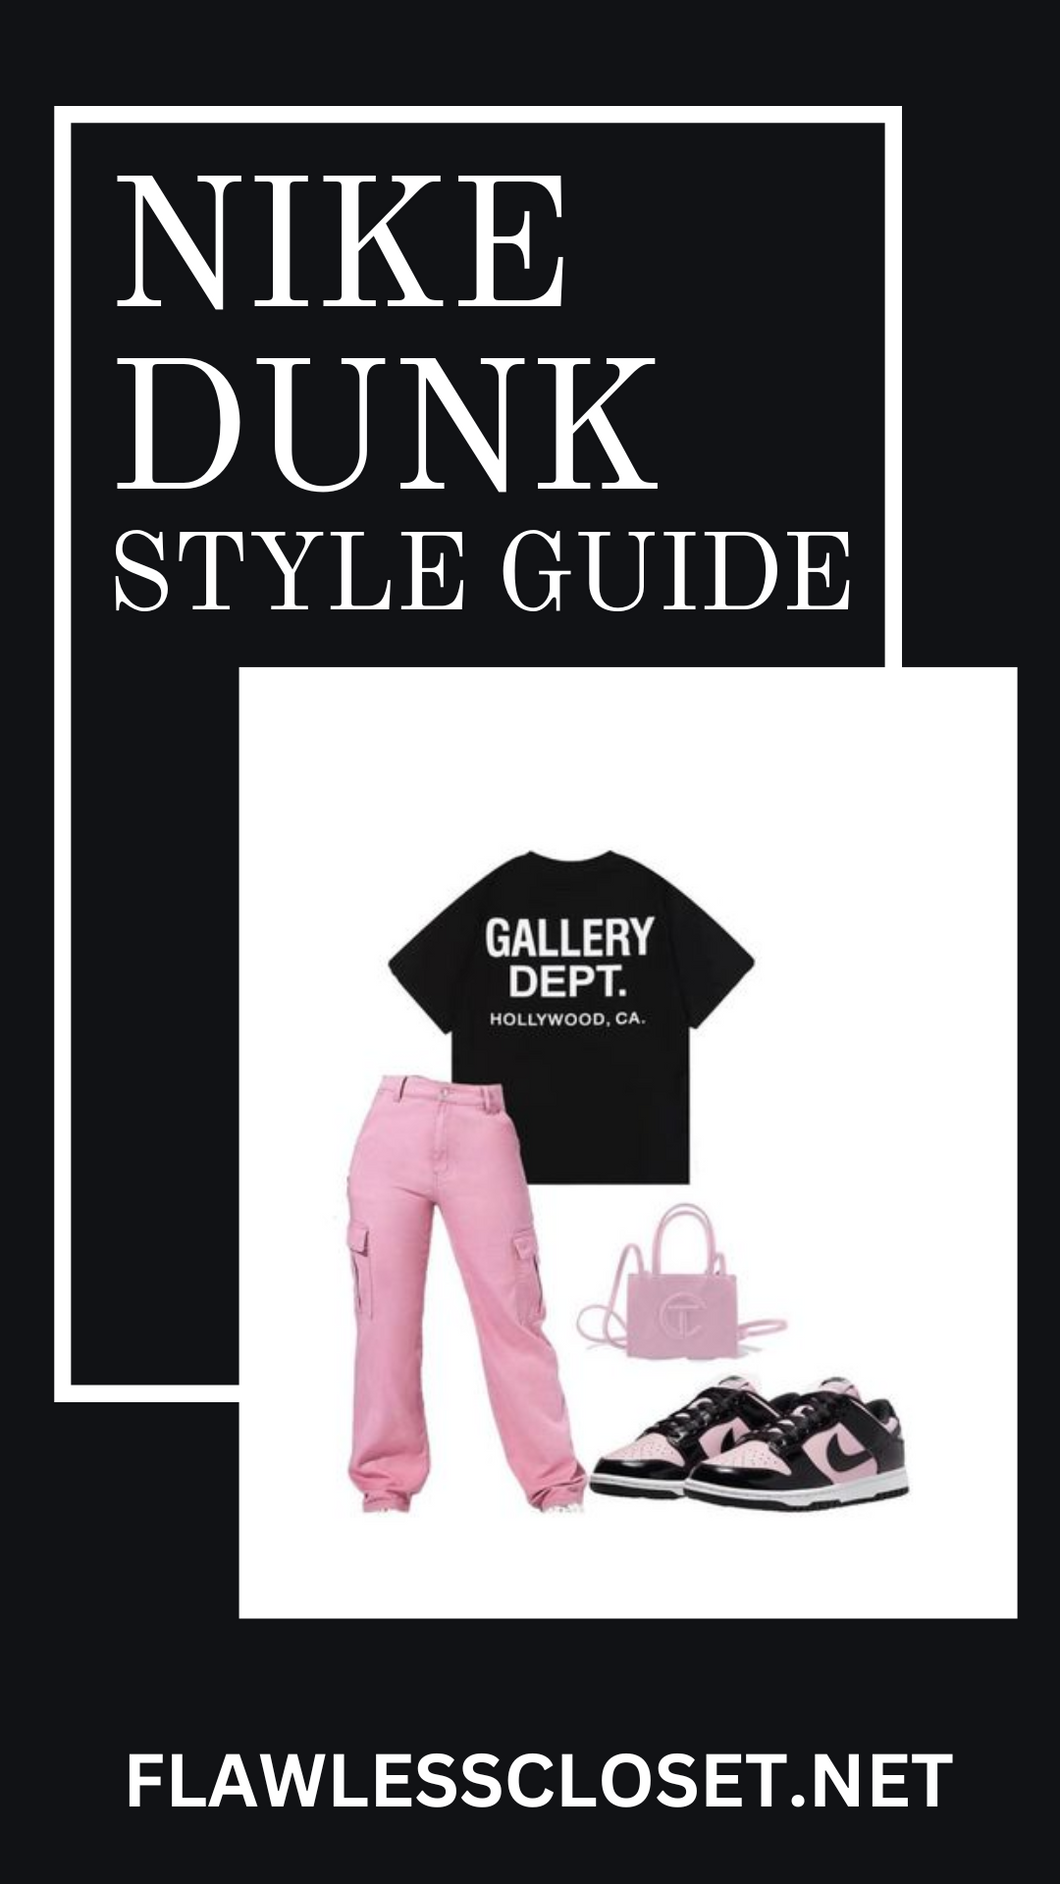 NIKE DUNK STYLE GUIDE